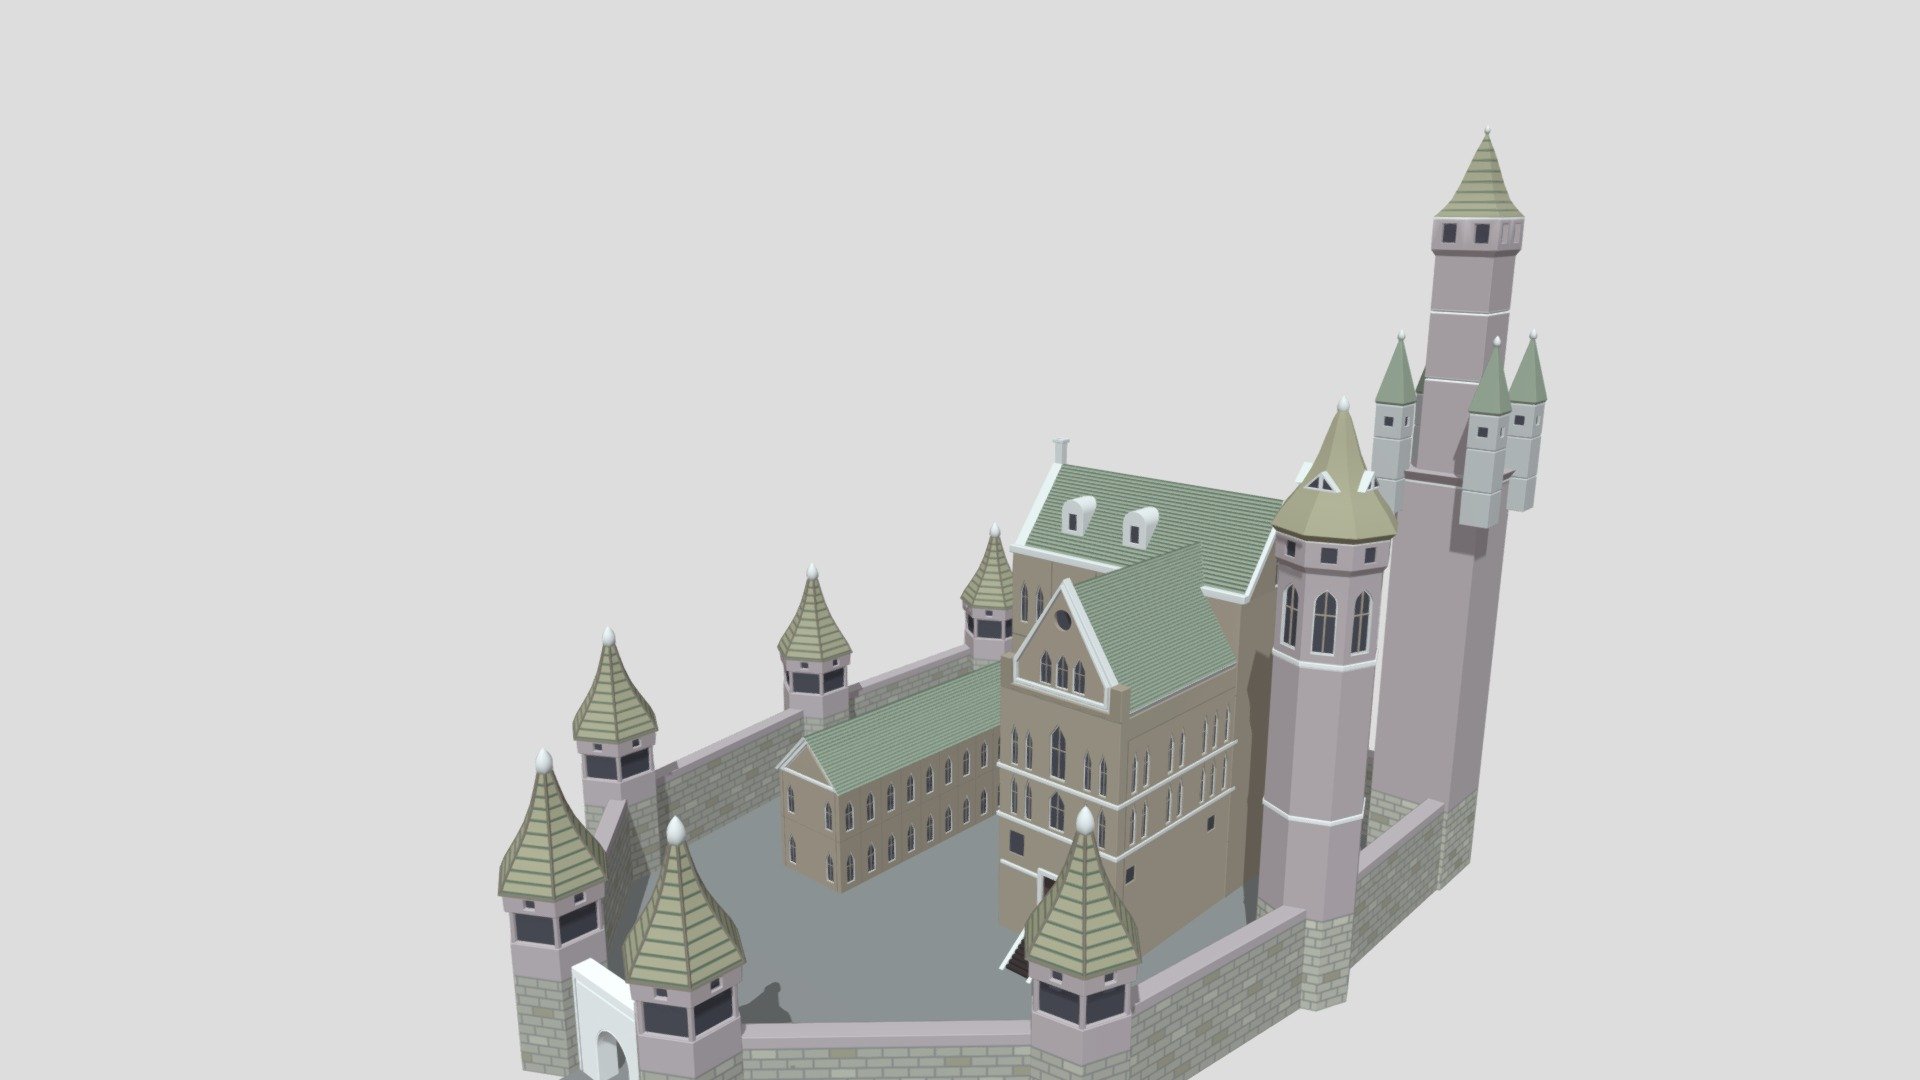 An Fortress/Castle Based On 18-th Century Architecture Free For Use. The .glb File Can Be Converted Into .blend Online. Anyone Can Improve This Model 3d model